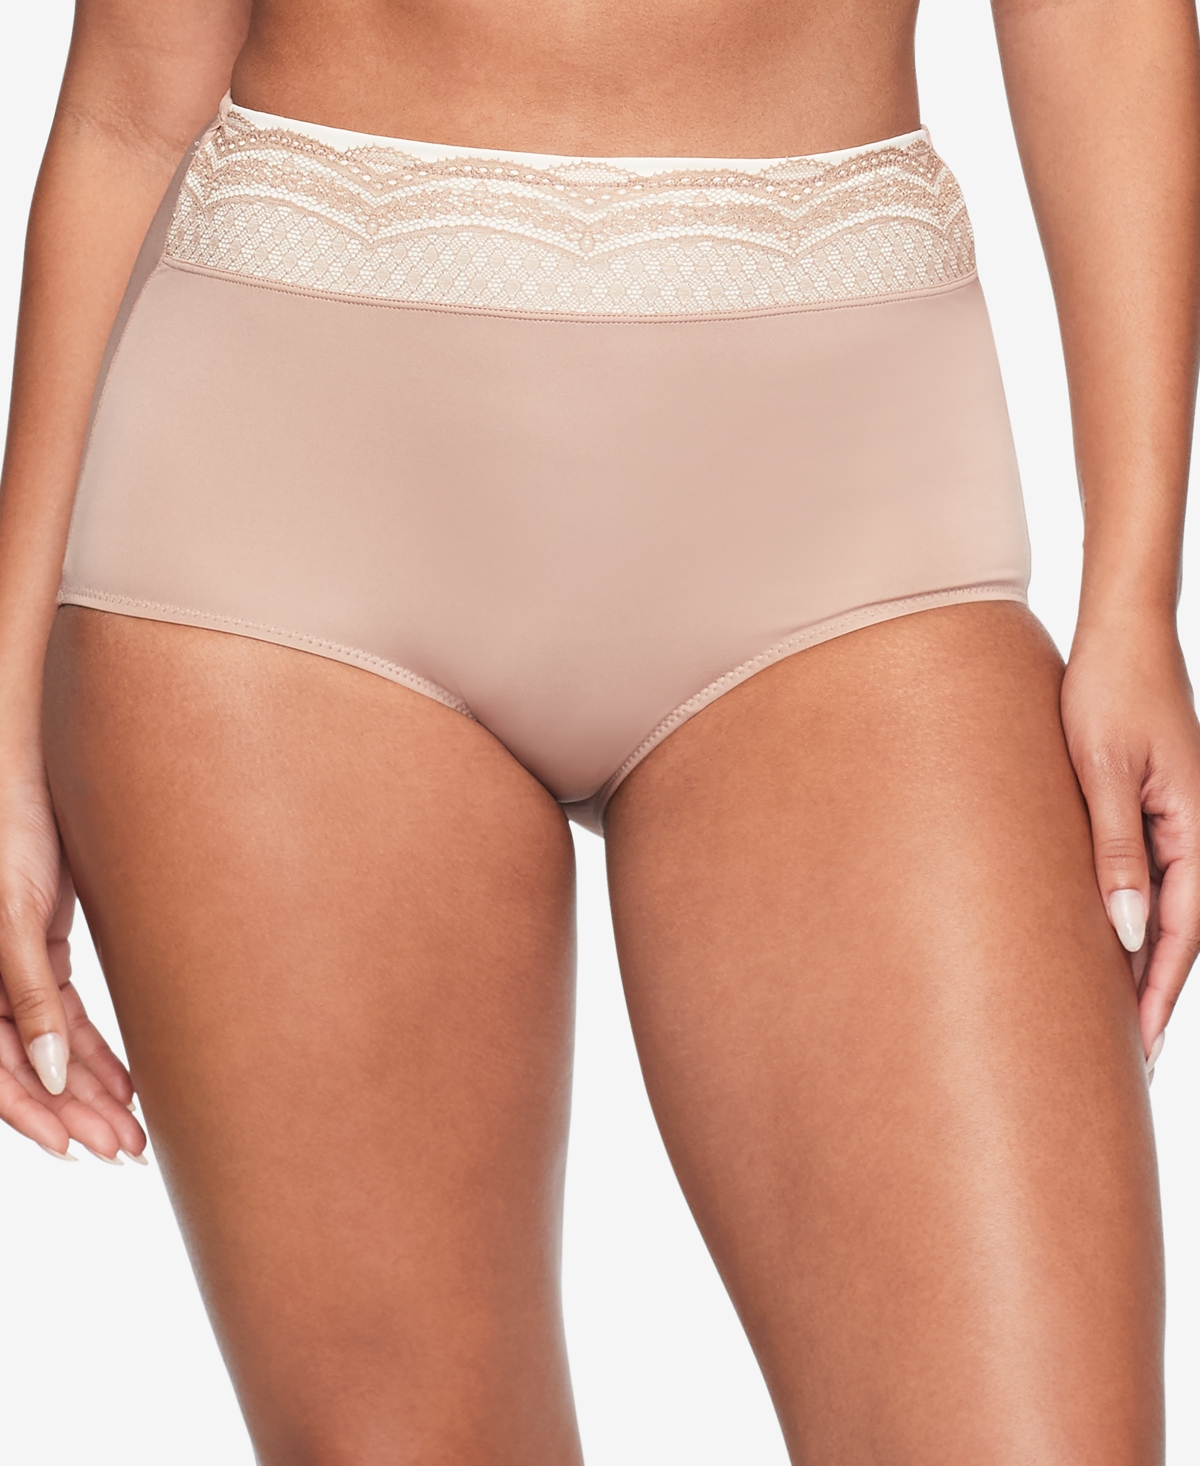 Warners No Pinching No Problems Dig-Free Comfort Waist with Lace Microfiber Brief RS7401P - Toasted Almond (Nude )